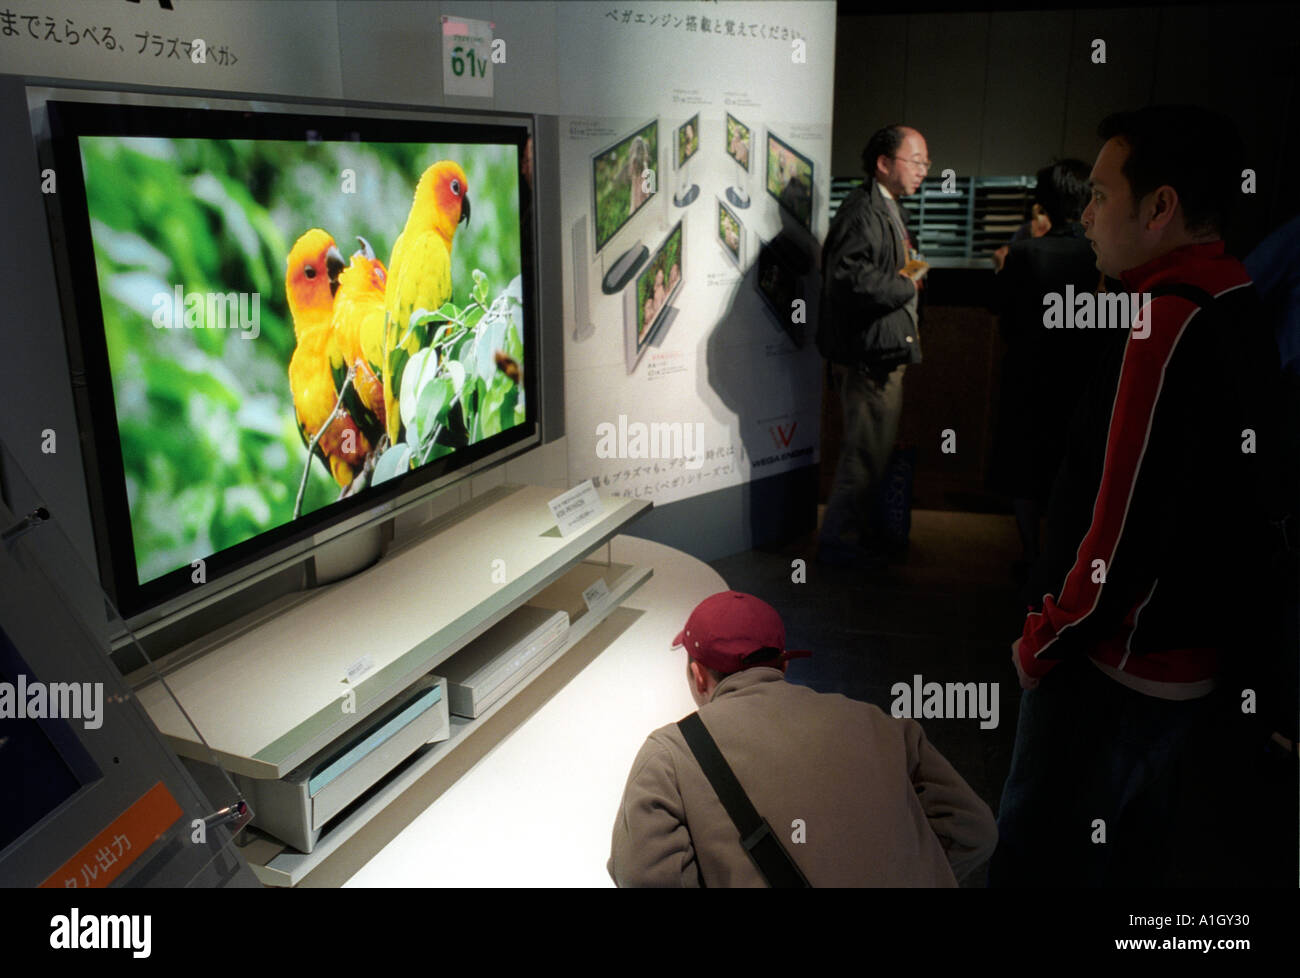 Shoppers check a new wide screen television in Tokyo electronic appliances showroom Stock Photo